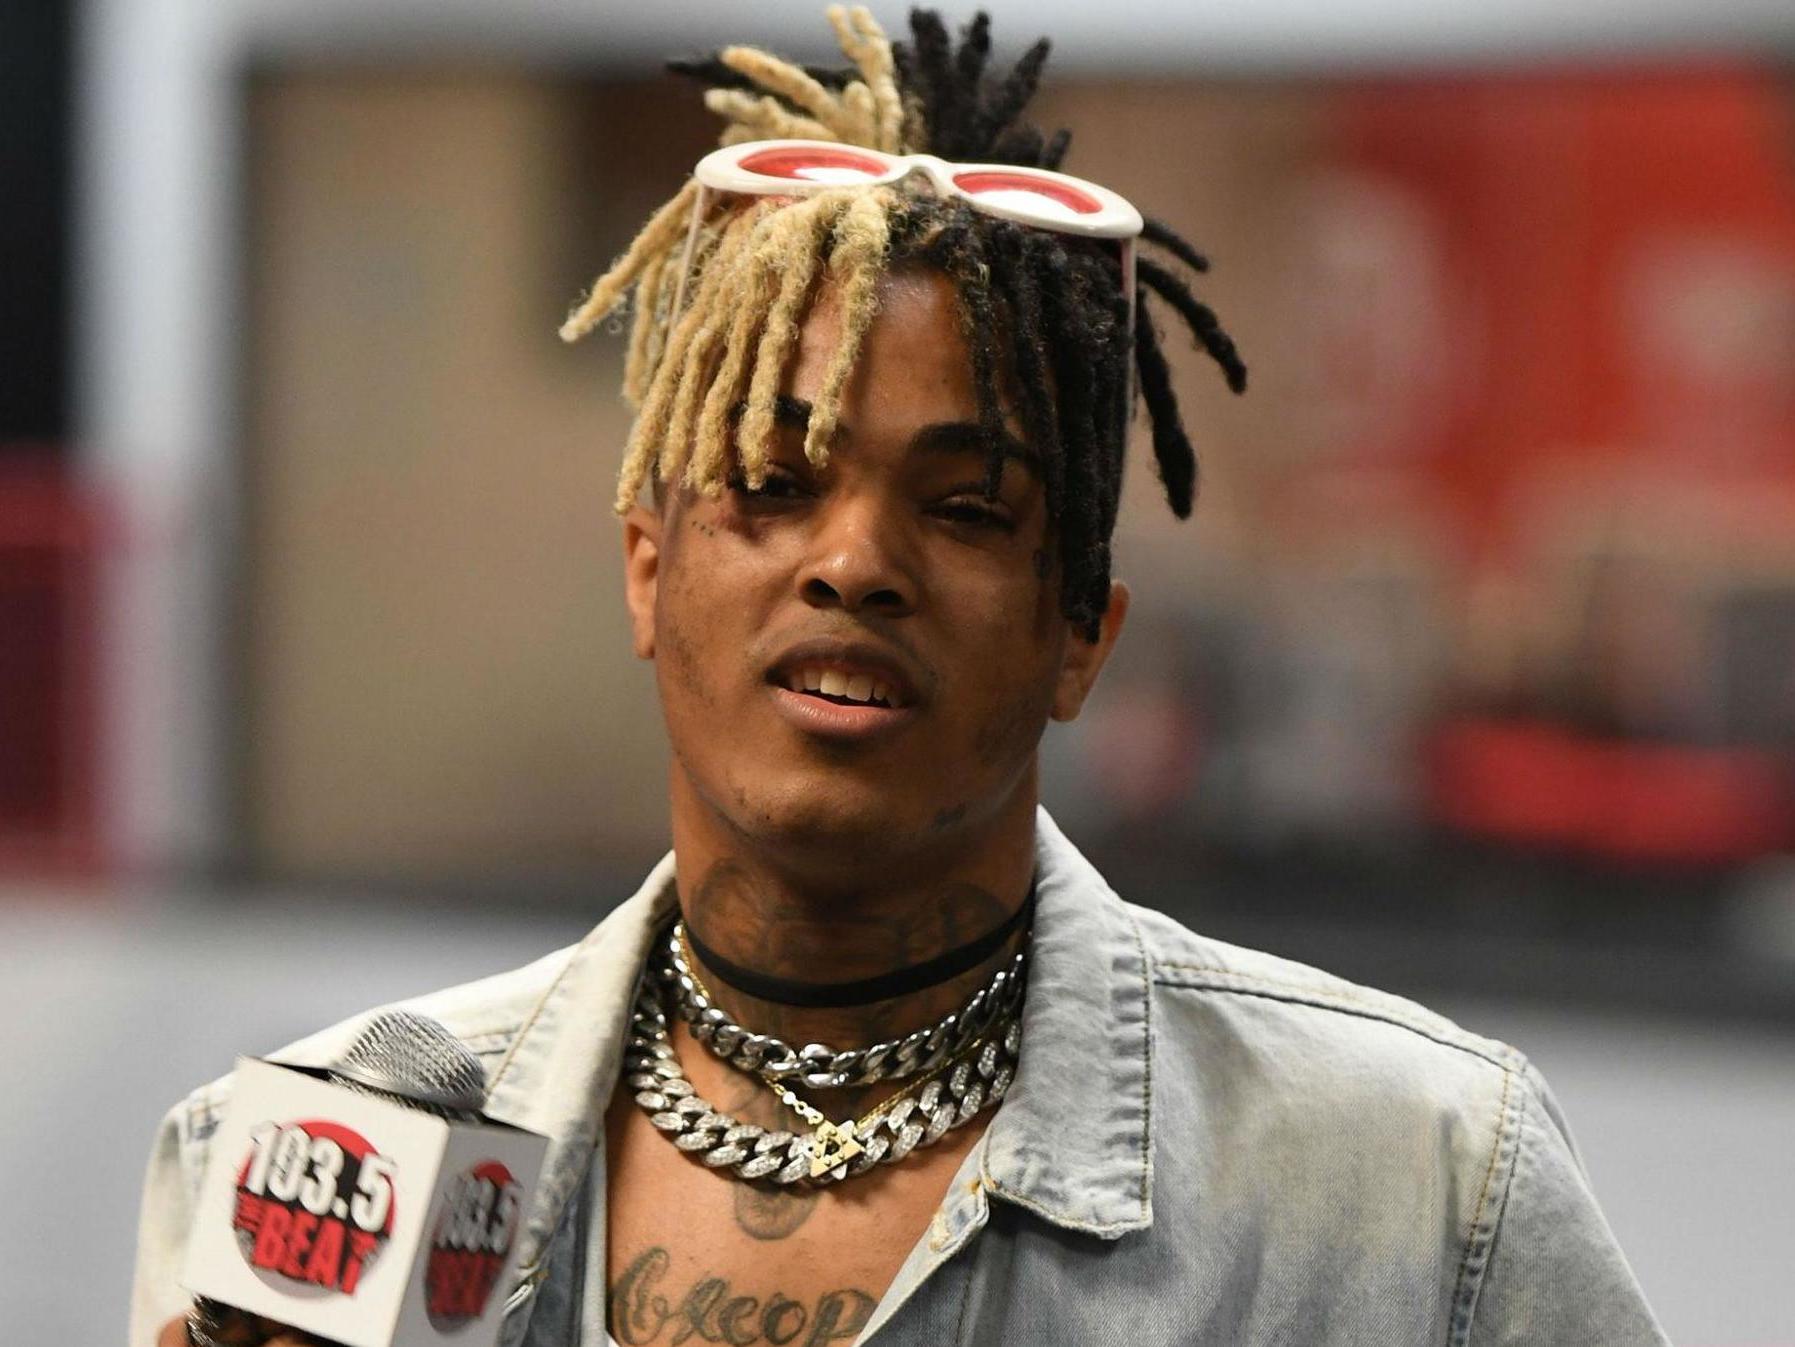 Xxxtentacion Death Rapper Attends His Own Funeral In New Posthumous Music Video The Independent